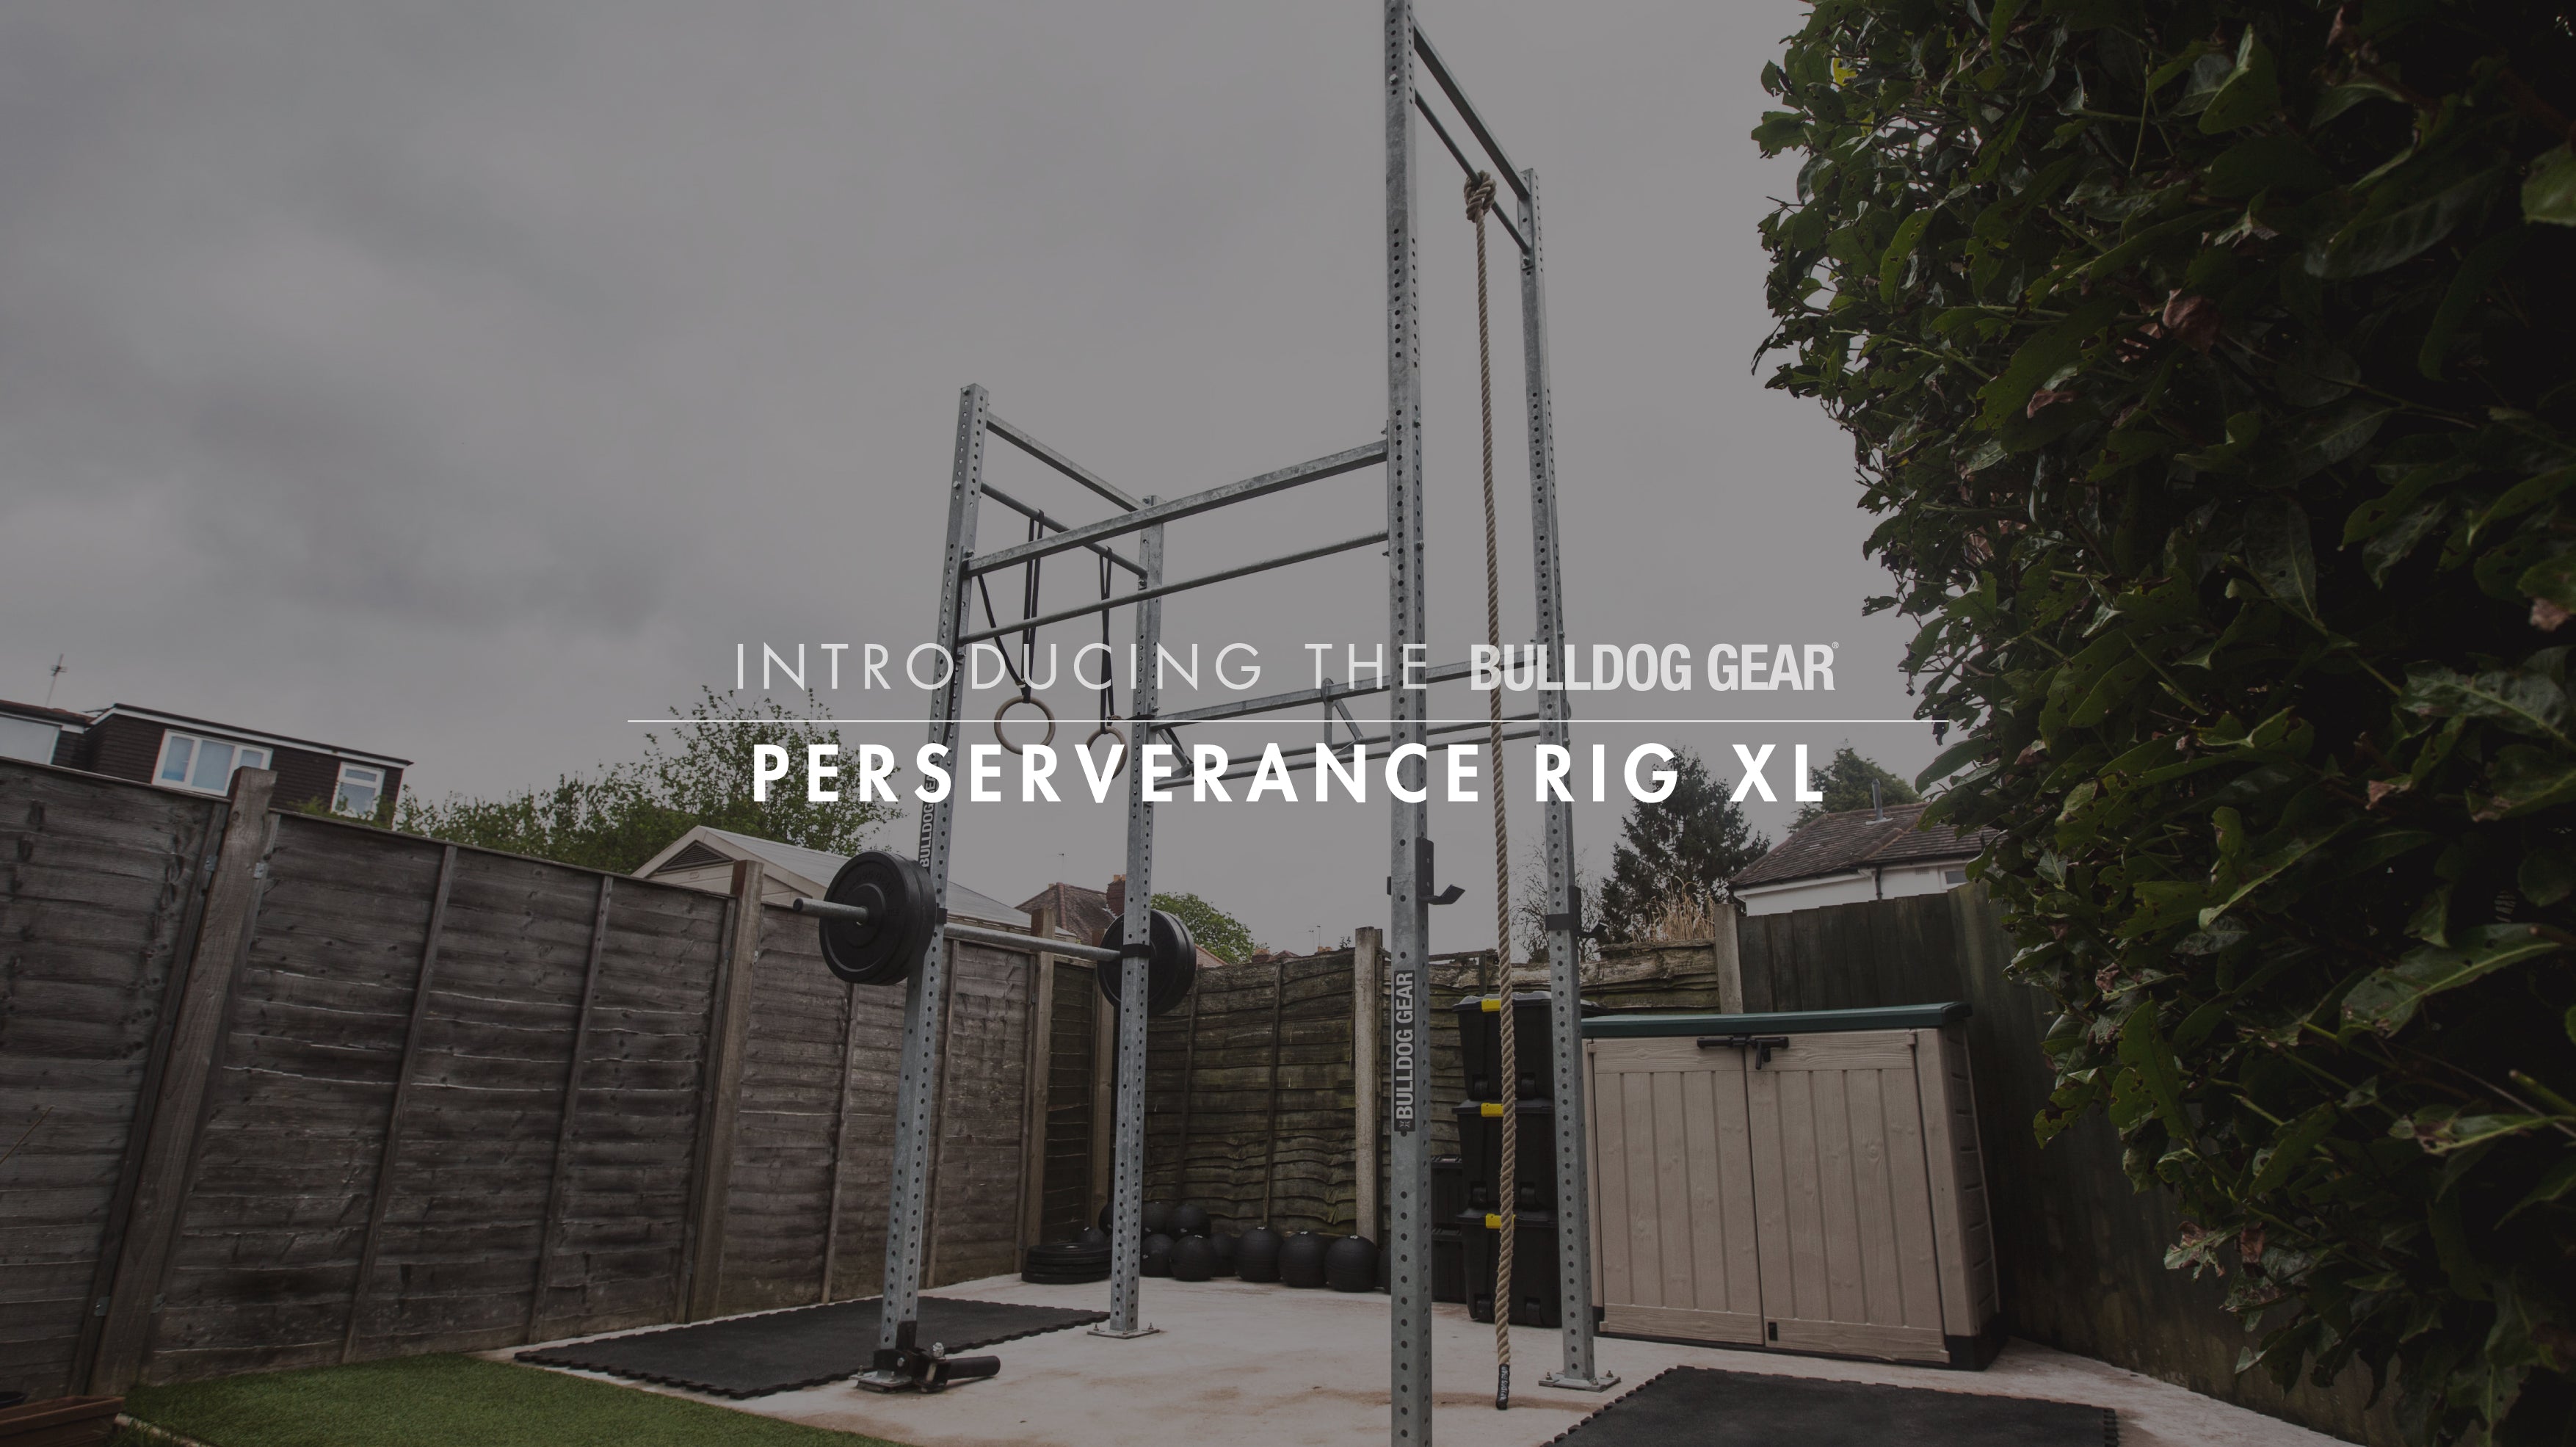 INTRODUCING: THE PERSEVERANCE RIG XL